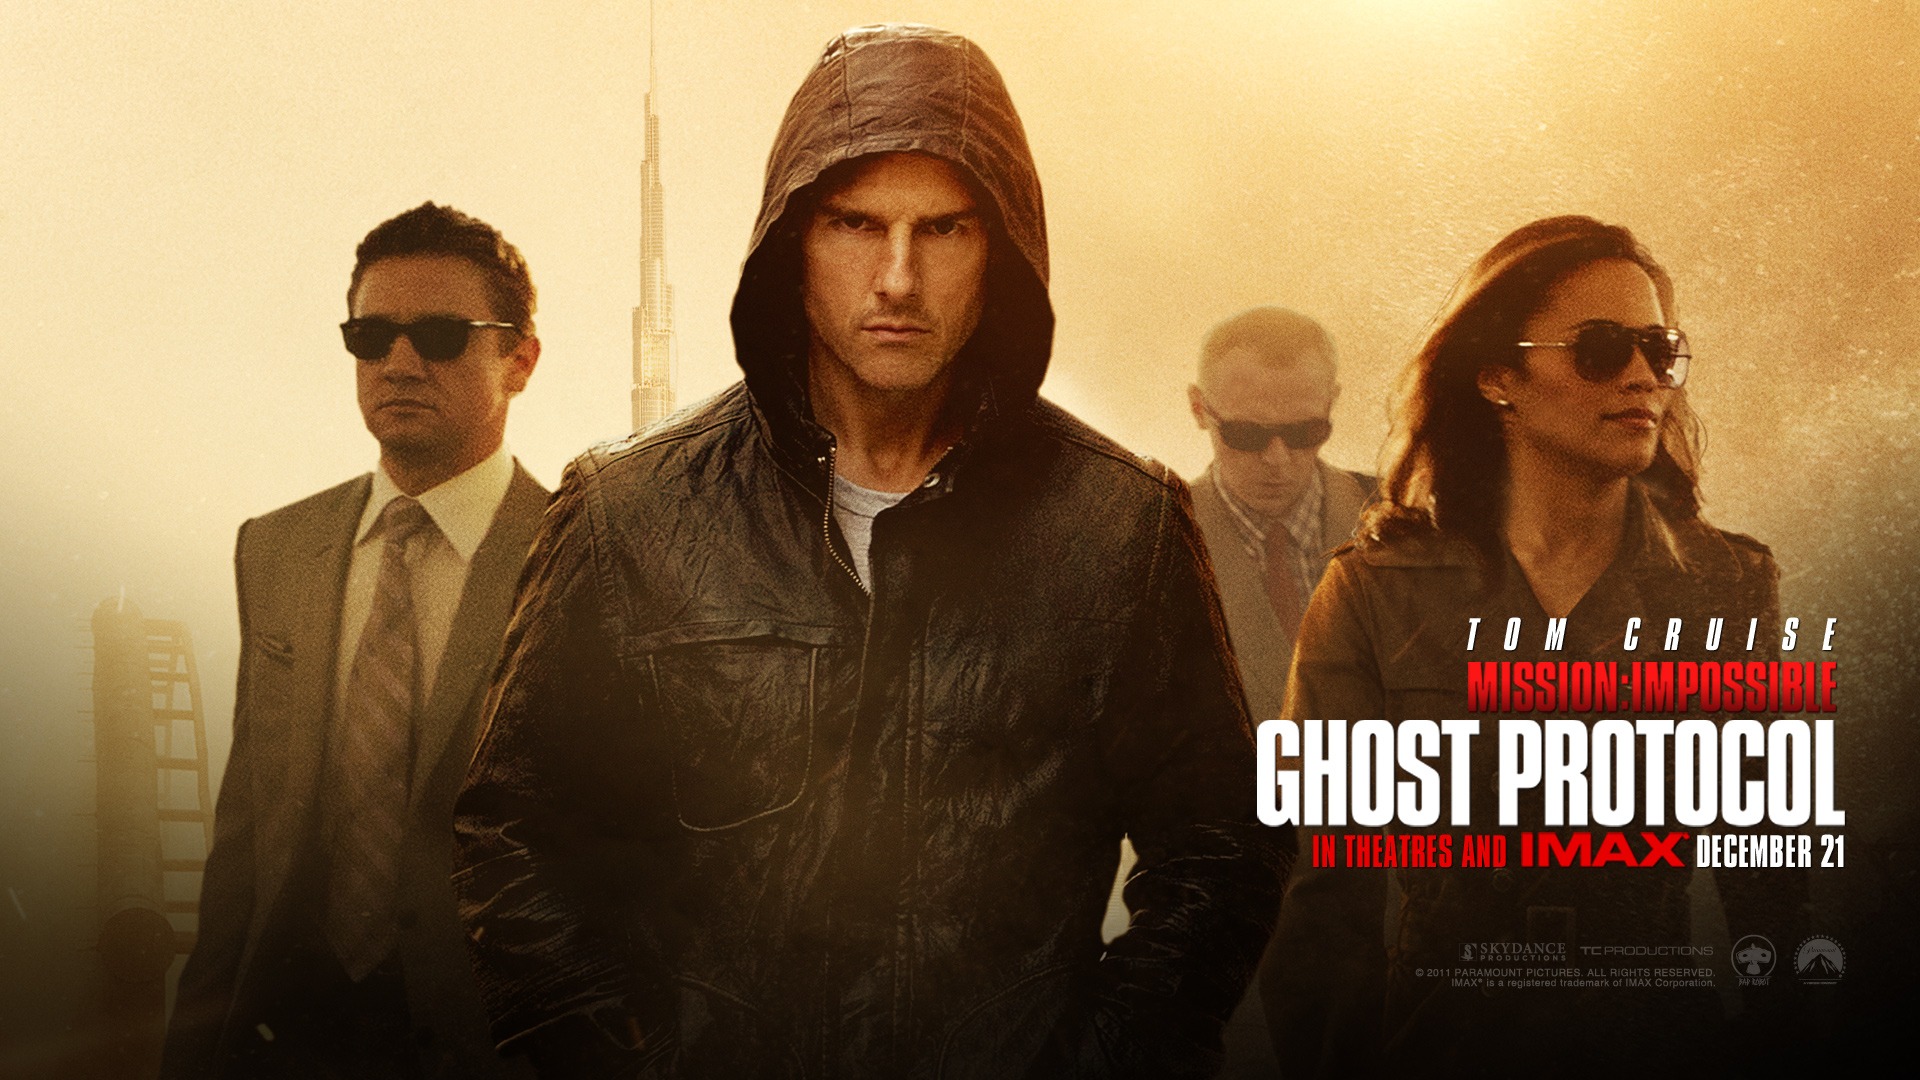 Mission: Impossible - Ghost Protocol 碟中谍4 高清壁纸1 - 1920x1080